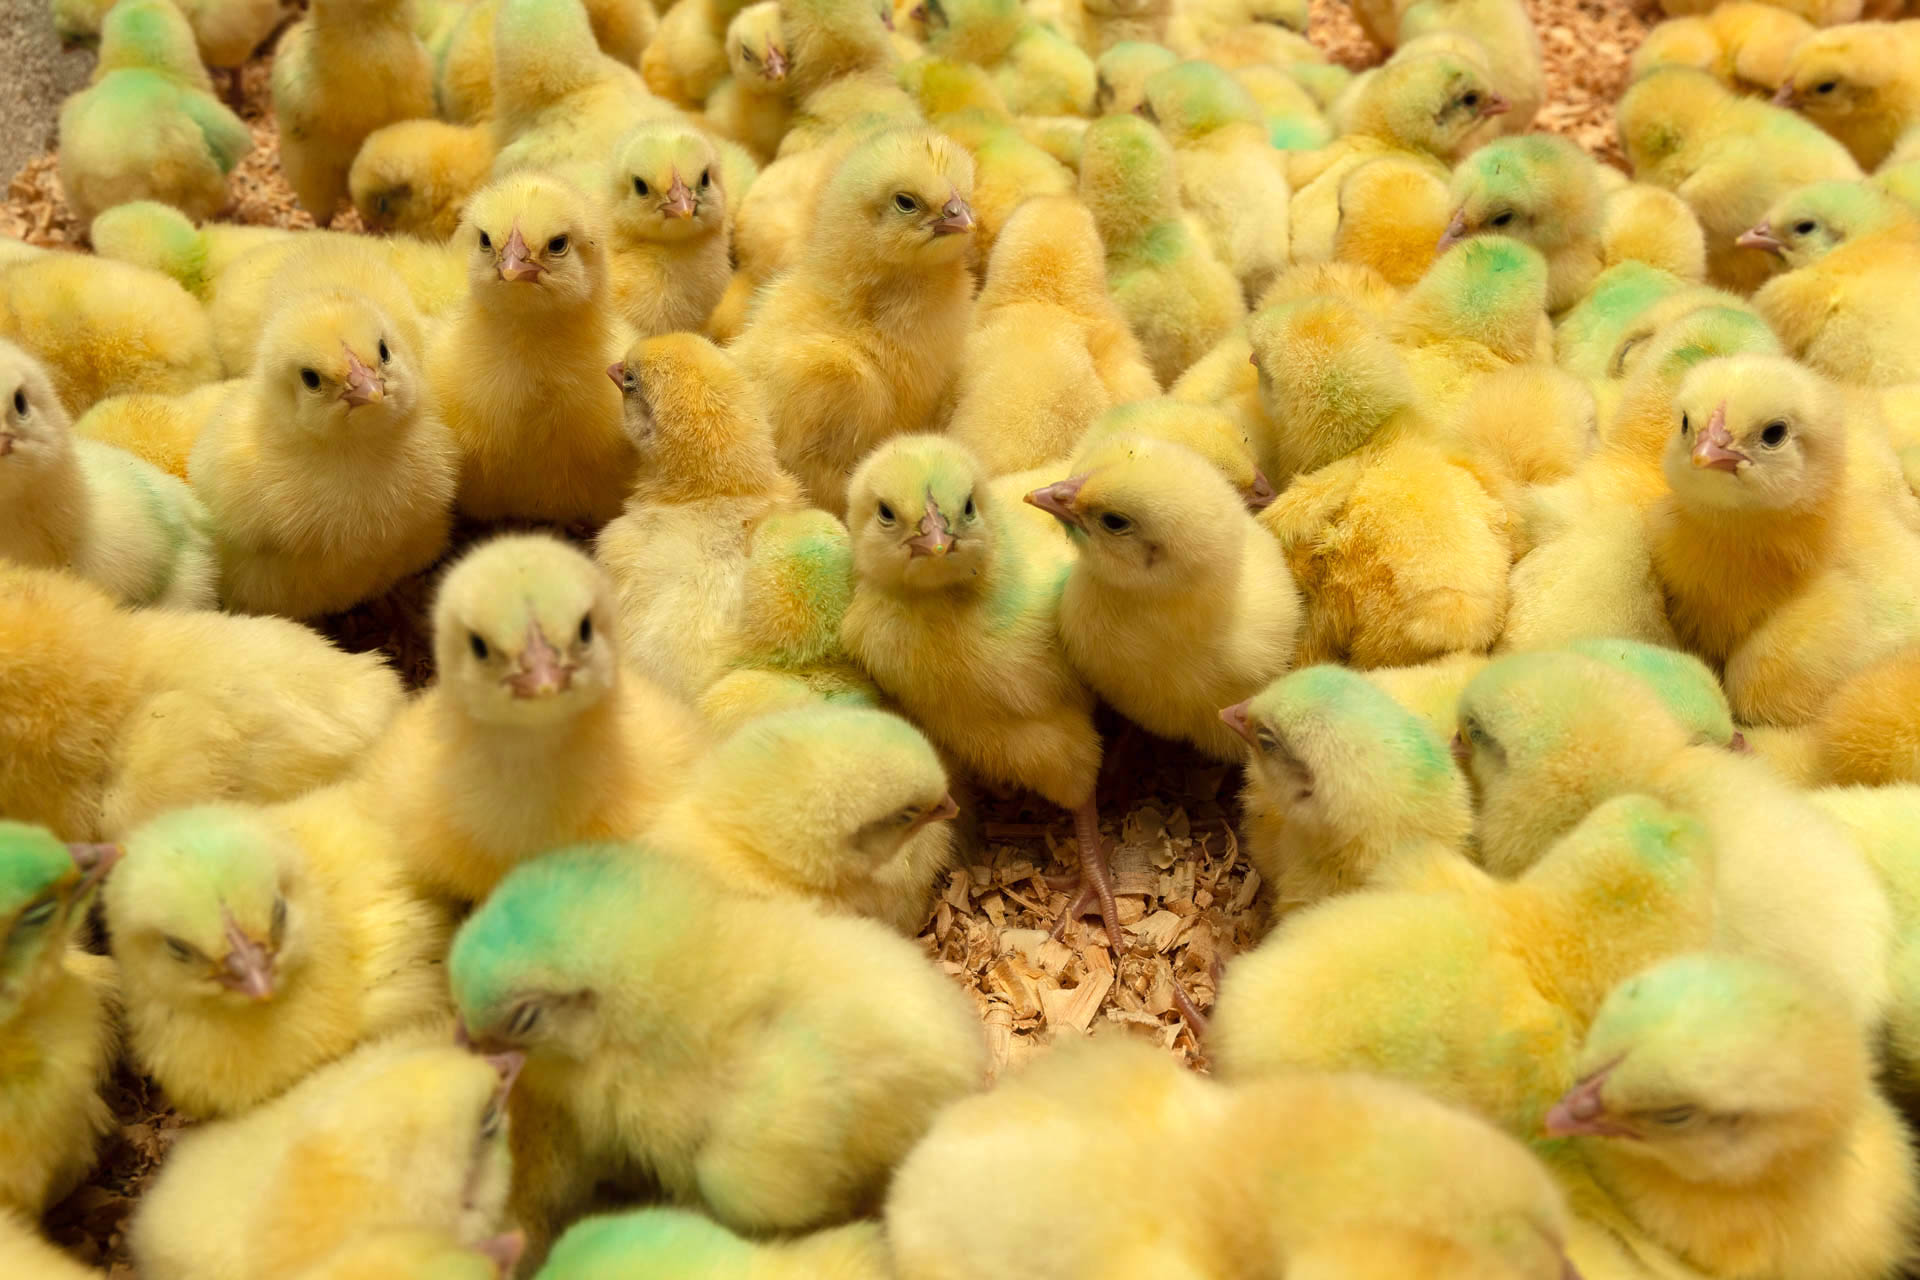 A large group of day-old chicks standing together on shavings
